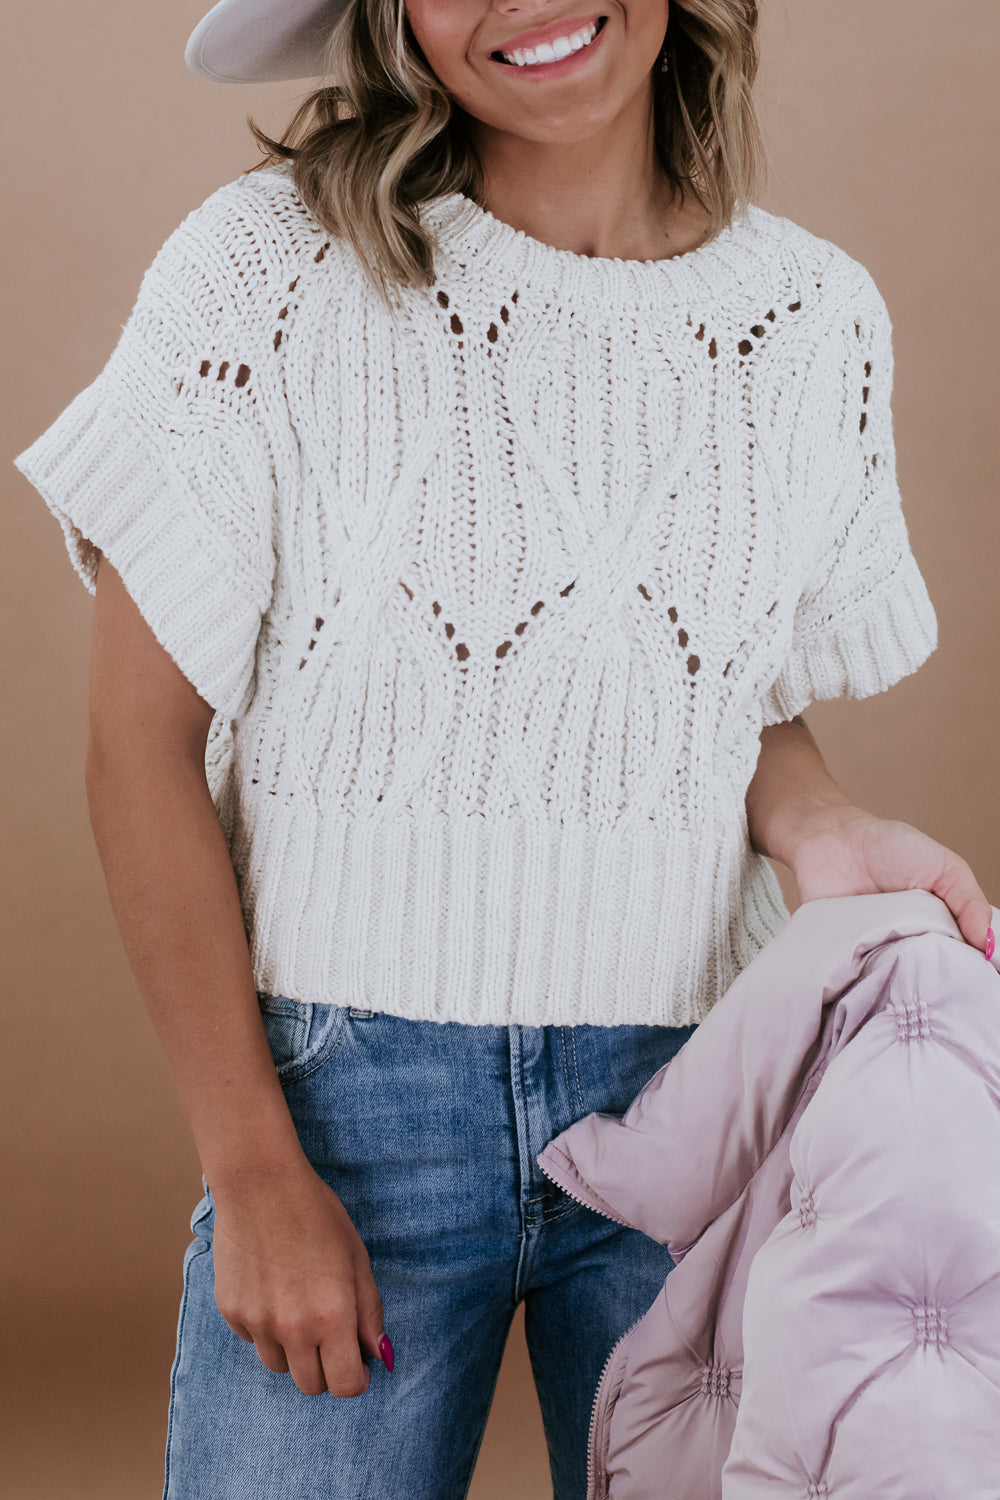 BY TOGETHER: Cali Crochet Top Sweater, Cream